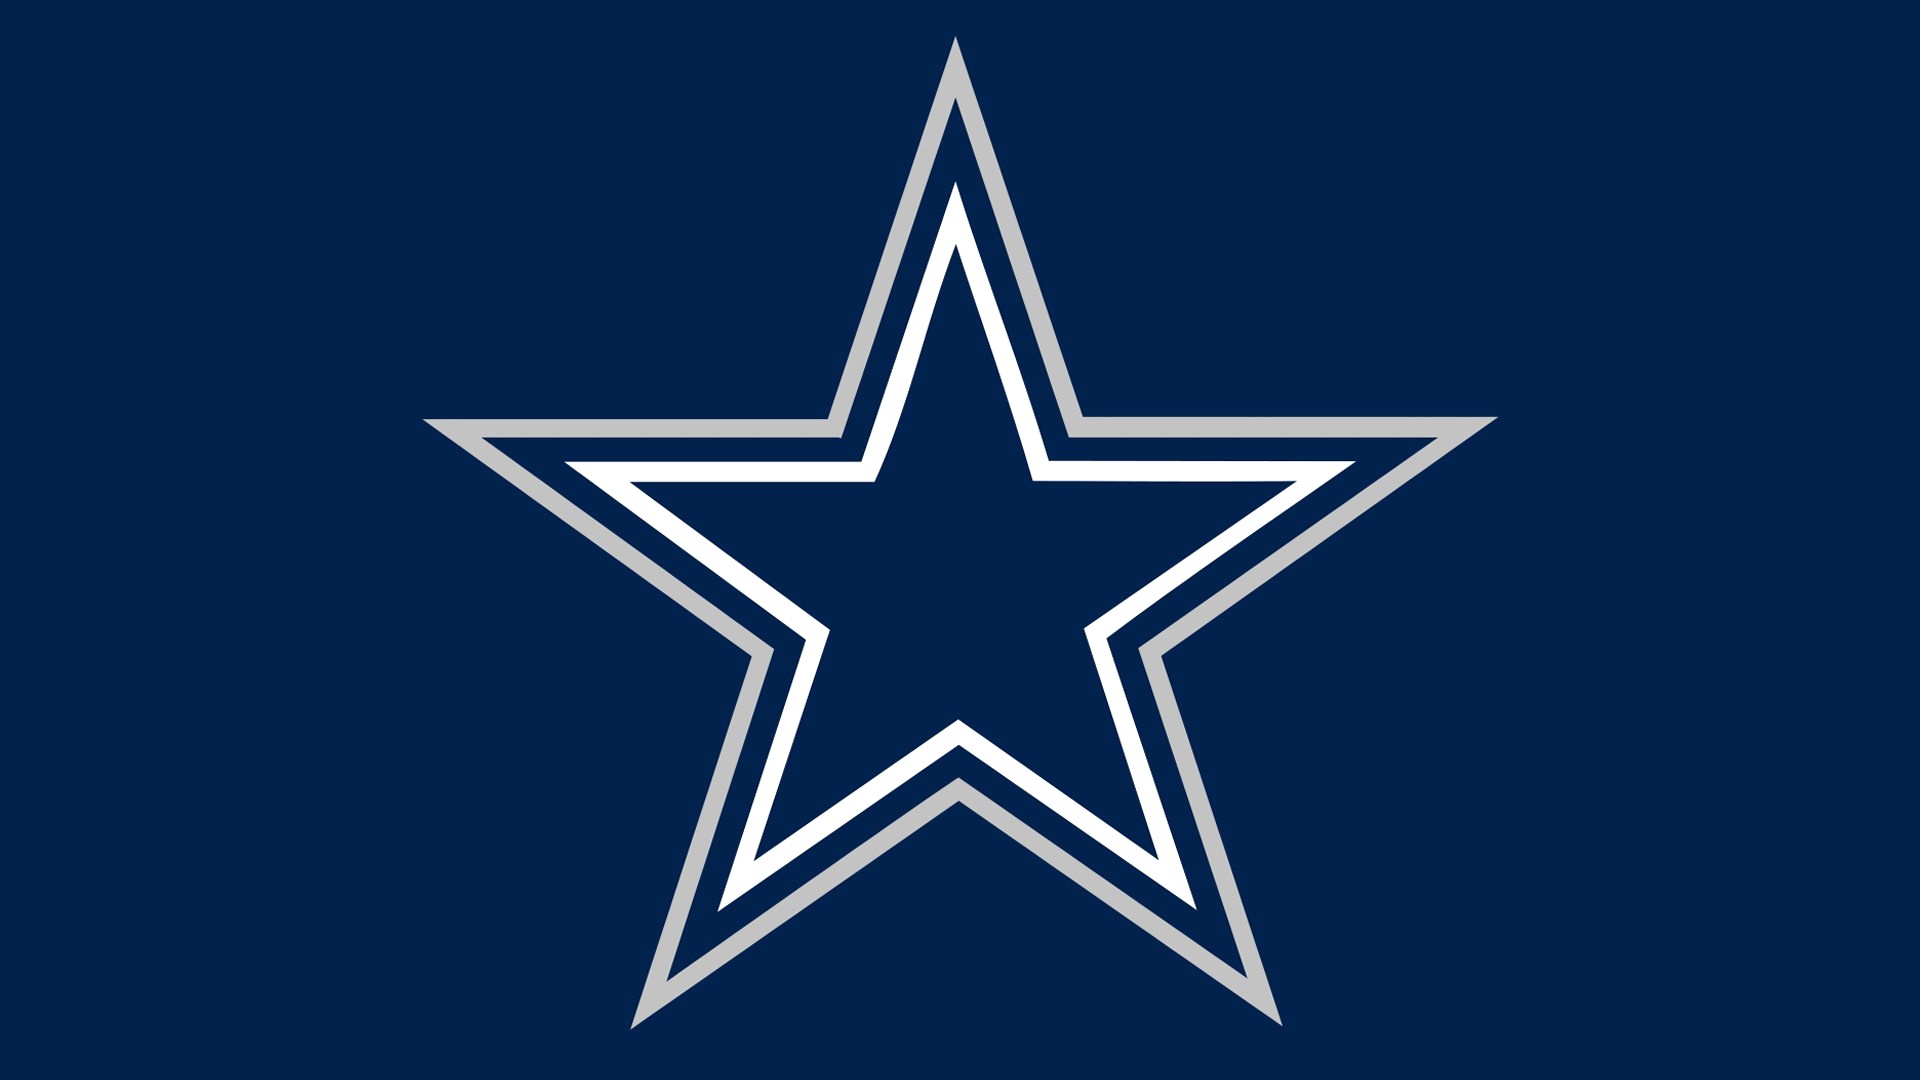 Best Dallas Cowboys Wallpaper in HD with high-resolution 1920x1080 pixel. You can use and set as wallpaper for Notebook Screensavers, Mac Wallpapers, Mobile Home Screen, iPhone or Android Phones Lock Screen